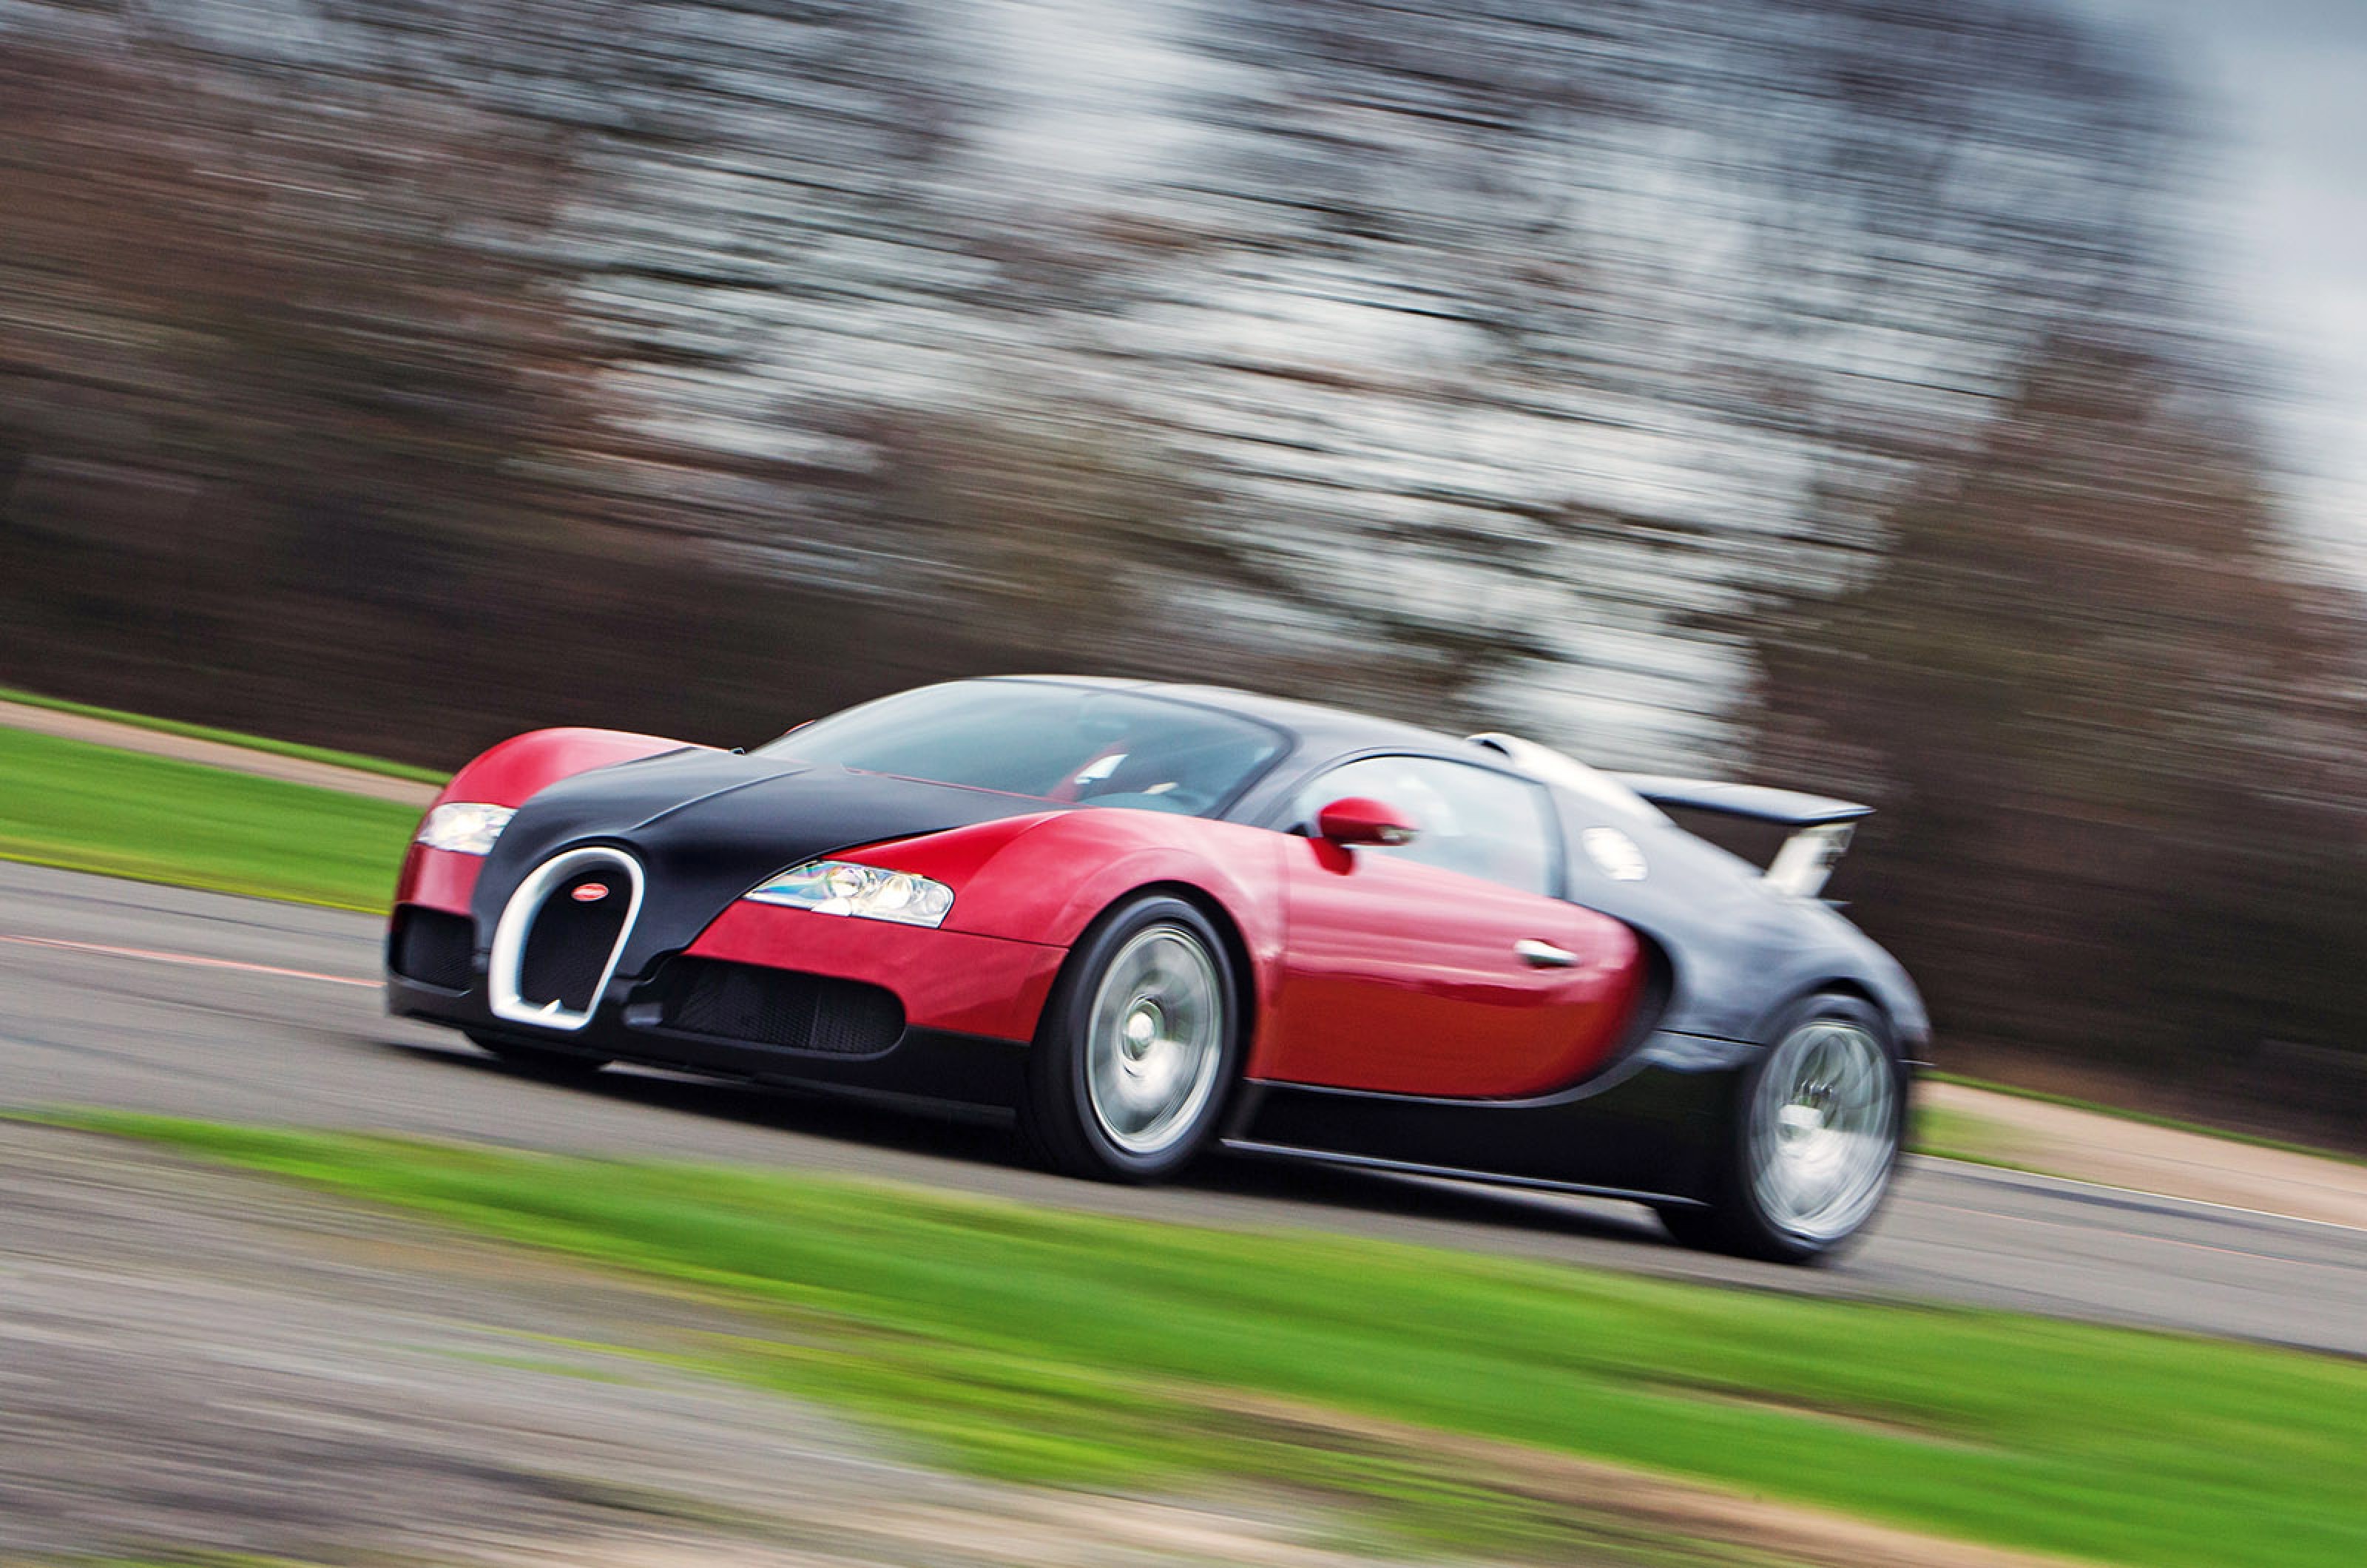 <p>The mighty Veyron was to be VW Group chief Ferdinand Piëch’s tour de force.</p>  <p>His brief to Bugatti’s engineers was simple: create a 1000hp (986bhp) hypercar capable of 250mph, and we’ll sell it for €1m.</p>  <p>The Veyron’s development was tortuous, its W16 engine – the marriage of cylinder banks from two VW narrow-angled VR8 engines on to a single crankshaft – requiring 10 radiators to keep it cool.</p>  <p>But it was worth it: with eight litres, four turbochargers and an output, as requested, of 986bhp (1000hp), the Veyron powered its way to 253mph, taking the ‘world’s fastest production car’ mantle from the McLaren F1.</p>